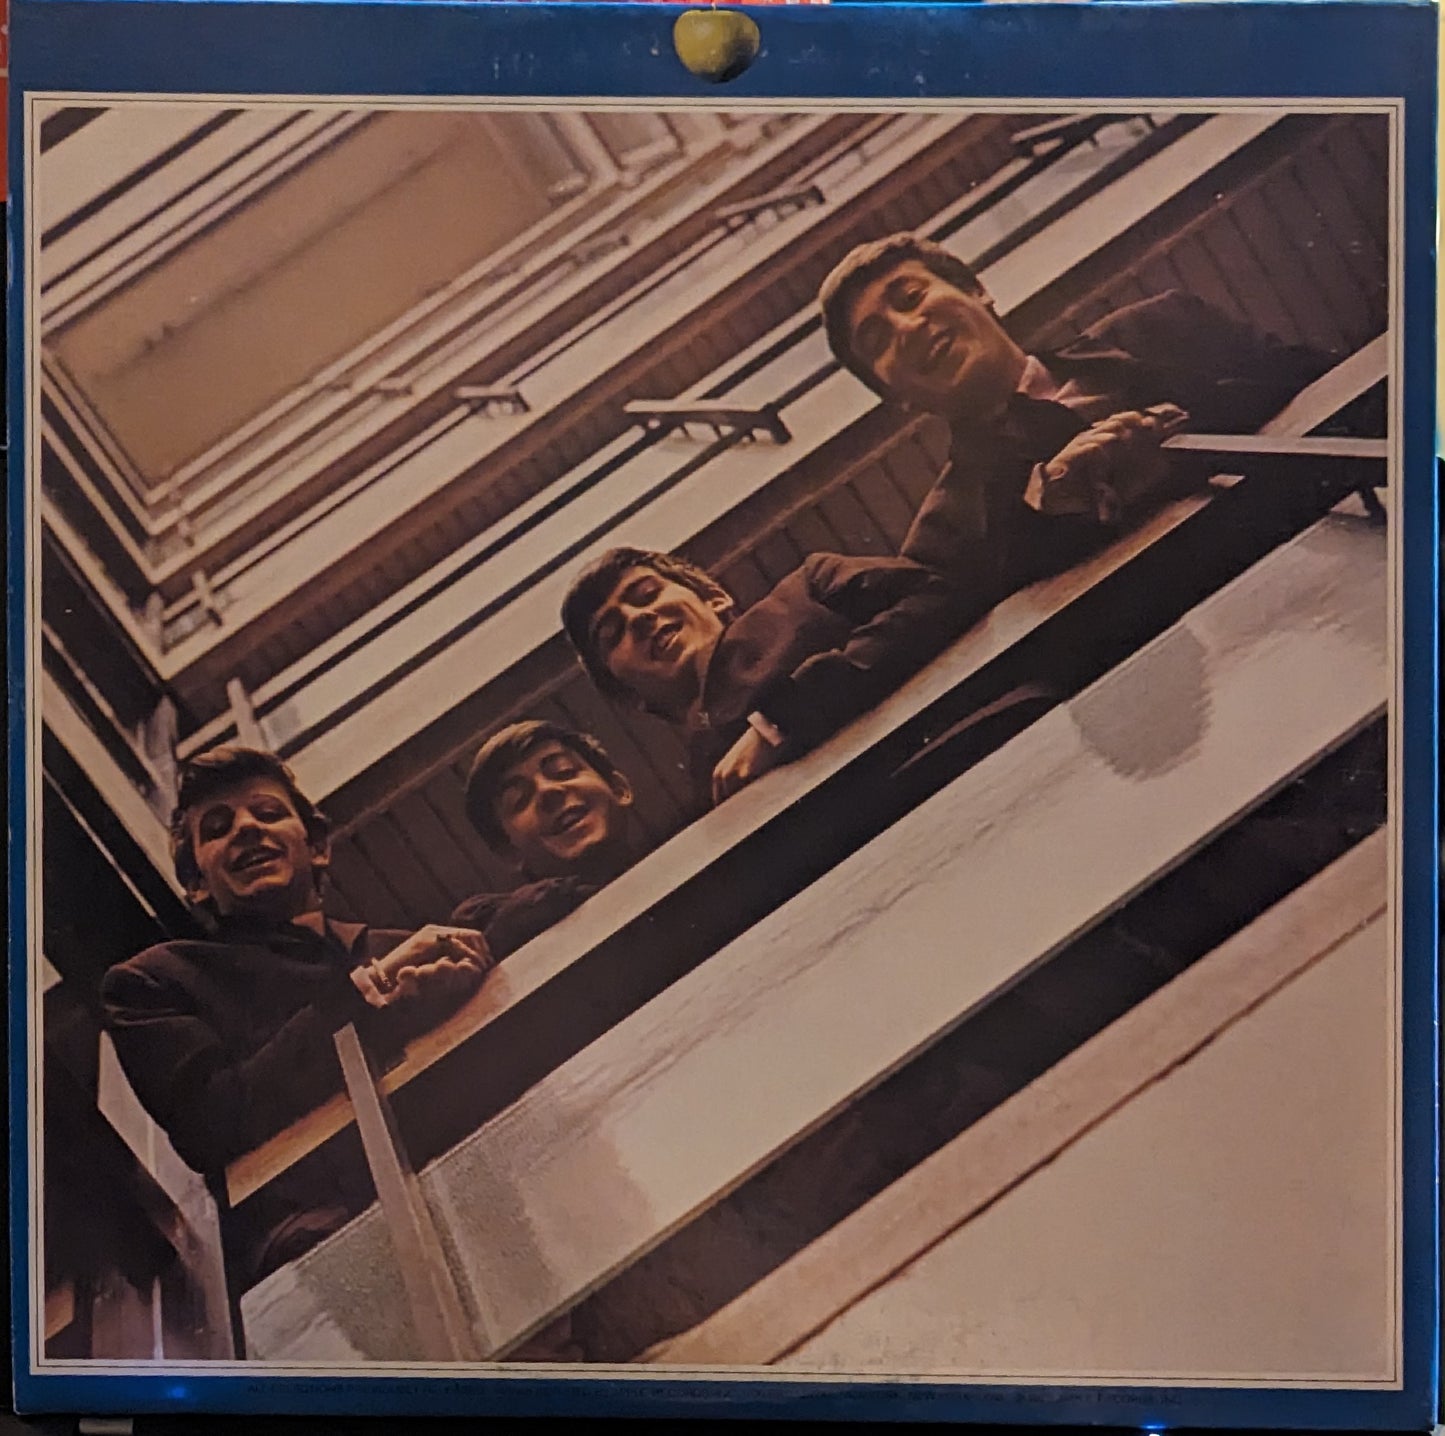 The Beatles 1967-1970 *WINCHESTER/STERLING* 2xLP Near Mint (NM or M-) Near Mint (NM or M-)